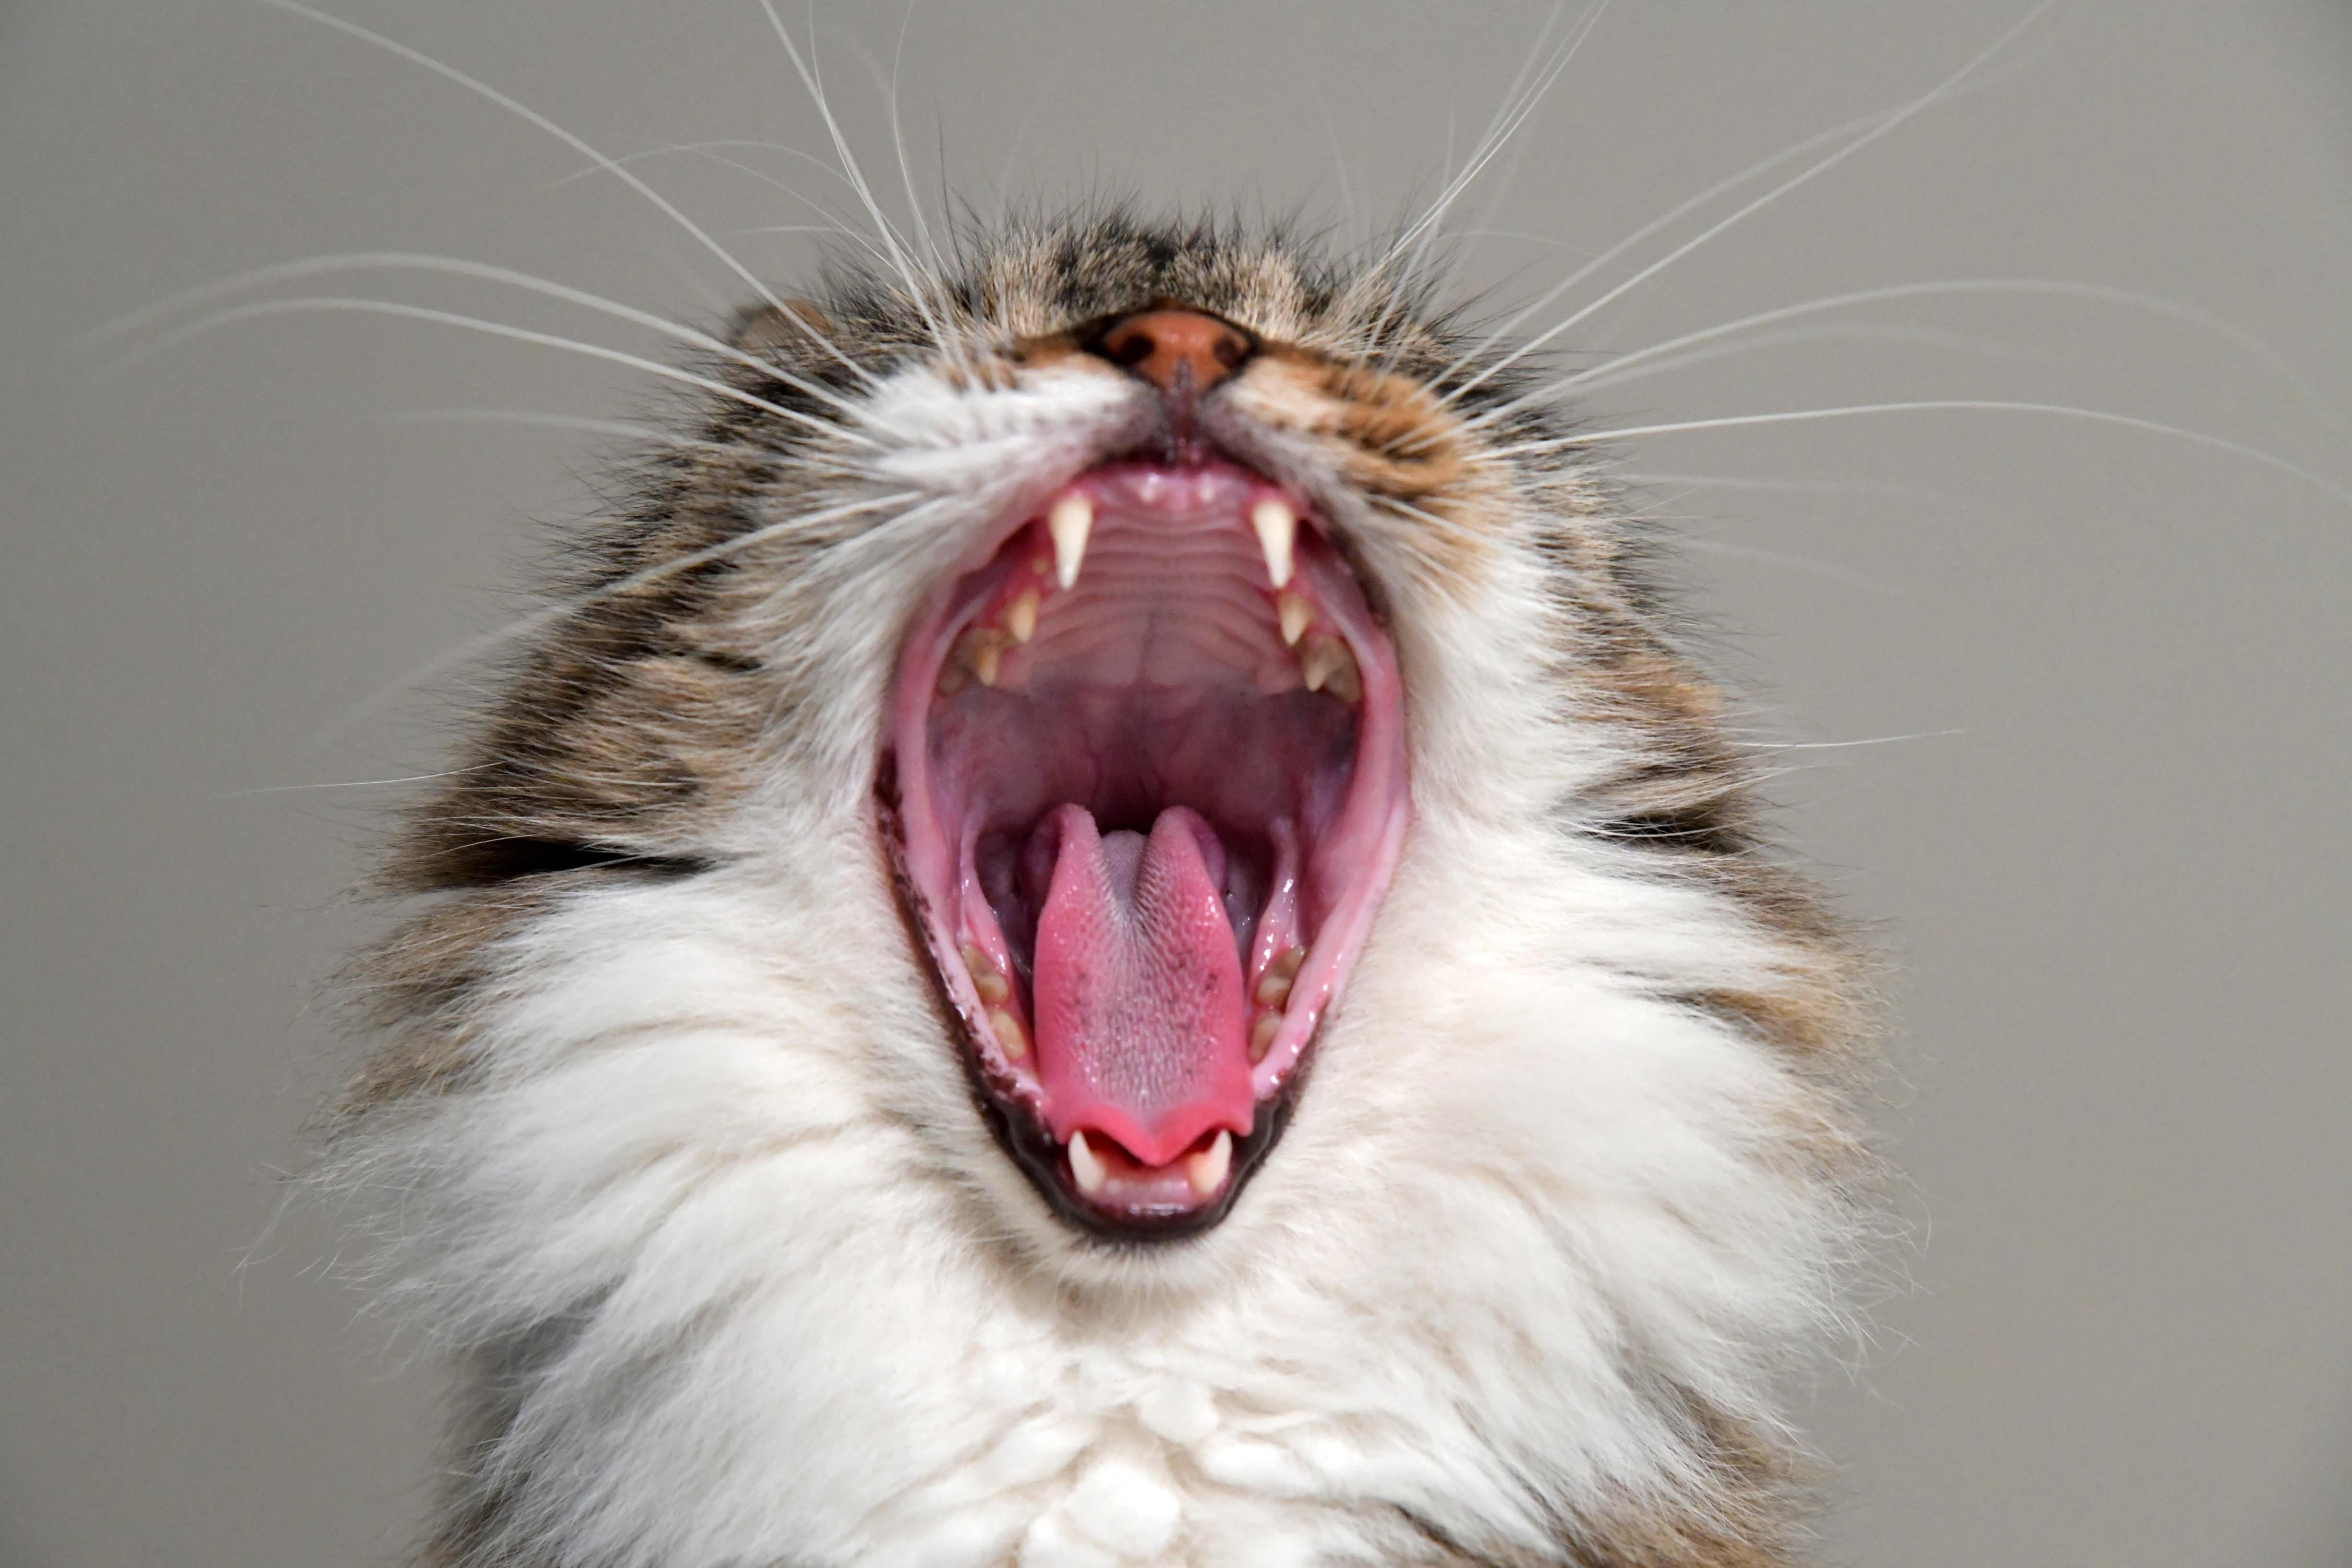 Cat with wide open mouth and teeth